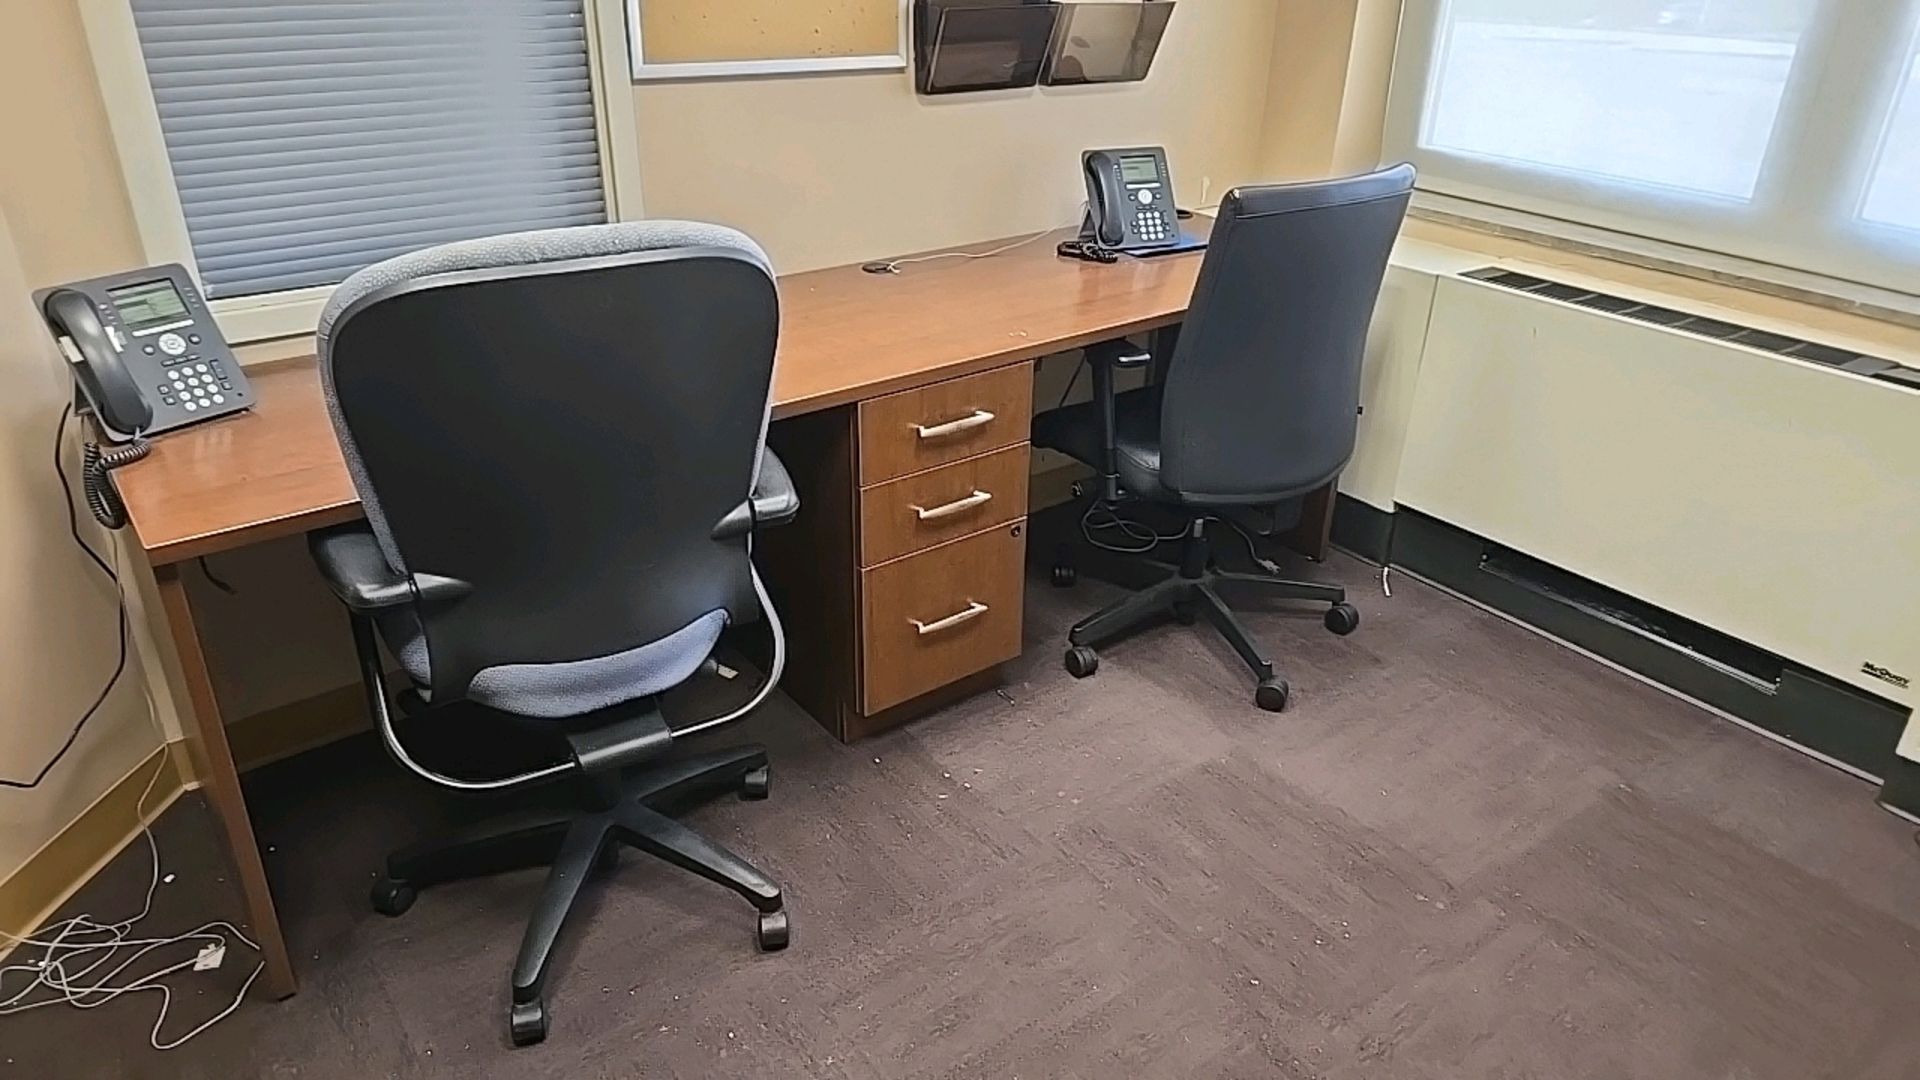 OFFICE TO INCLUDE: DESK, CHAIRS, BOOKSHELF